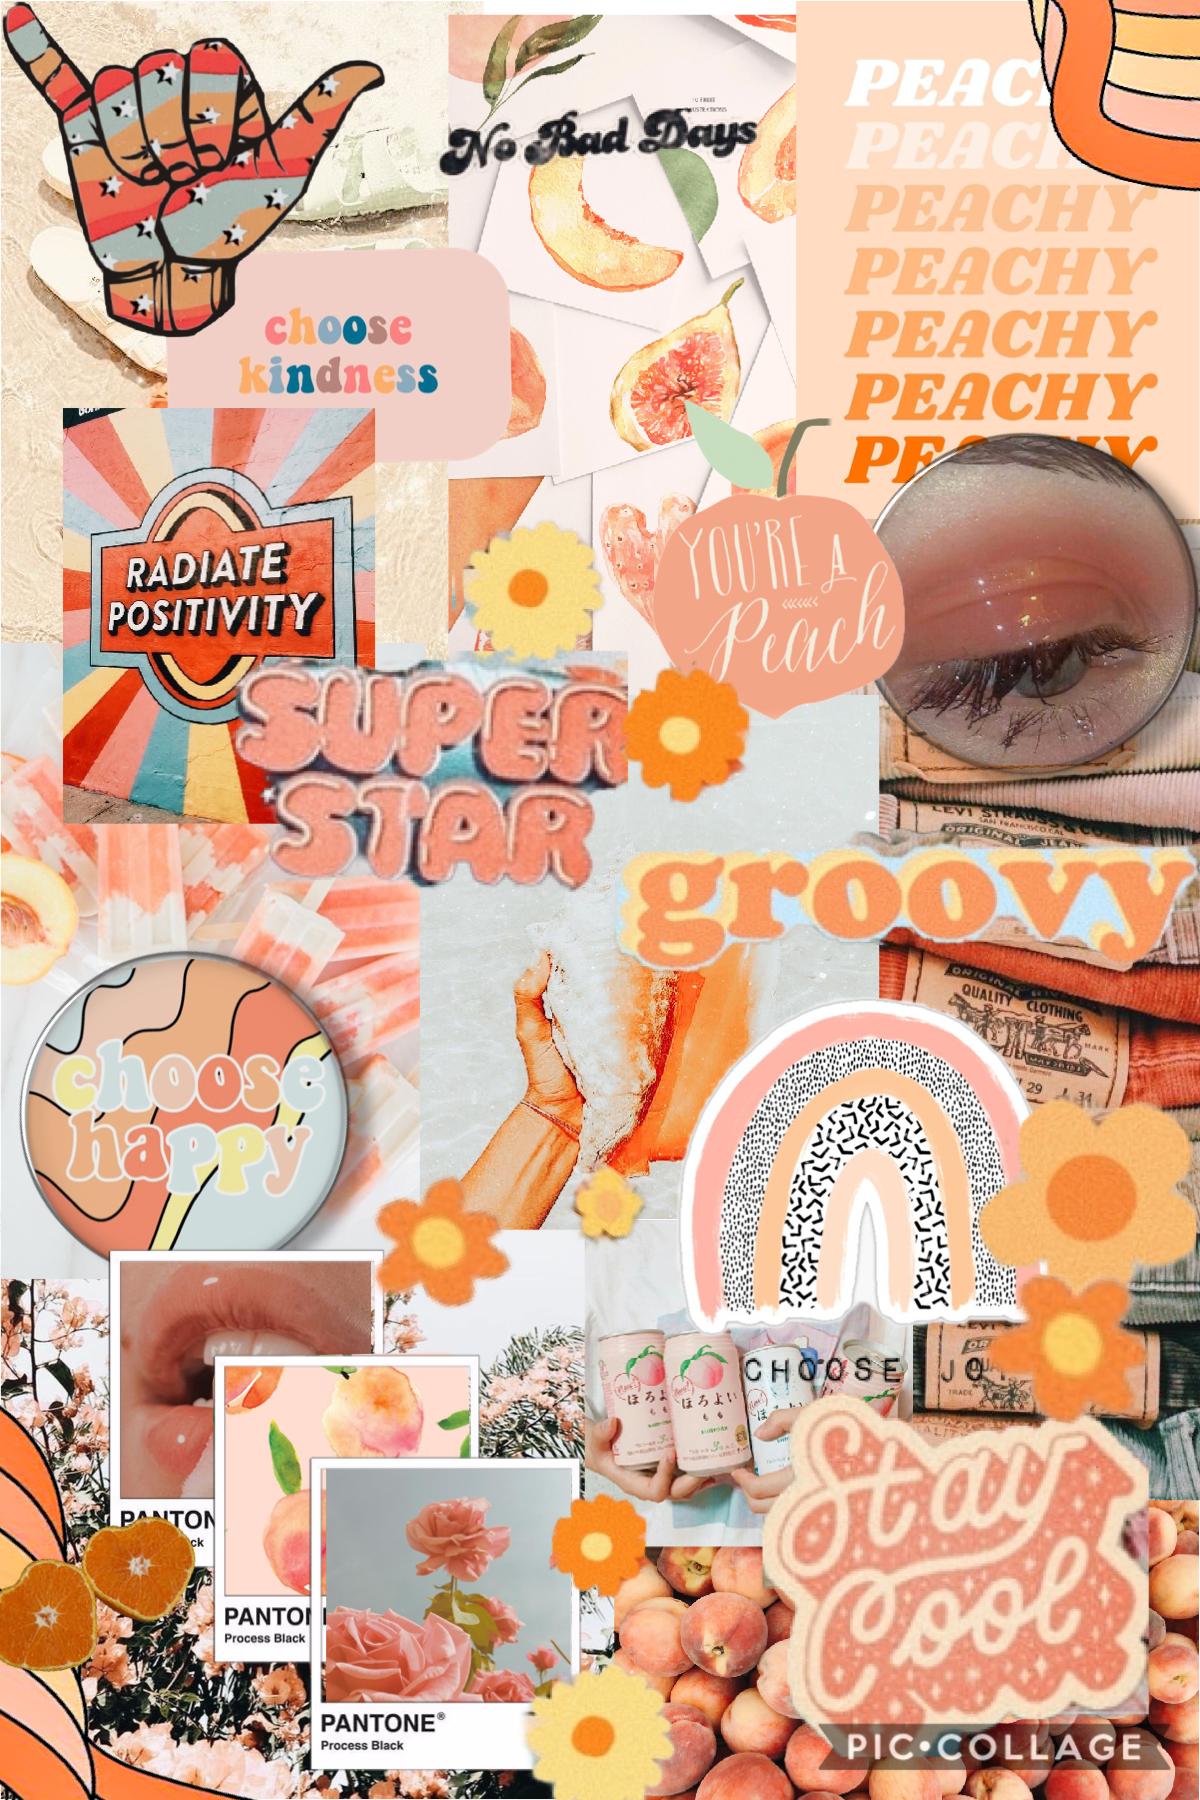 Dedicated post #1(tap)
Hey guys! Hope you like!! It took me so long, but I’m super proud of it!! 🍑🍑🍑🍑🍑🍑
Next up is a vintage/yellow theme!!